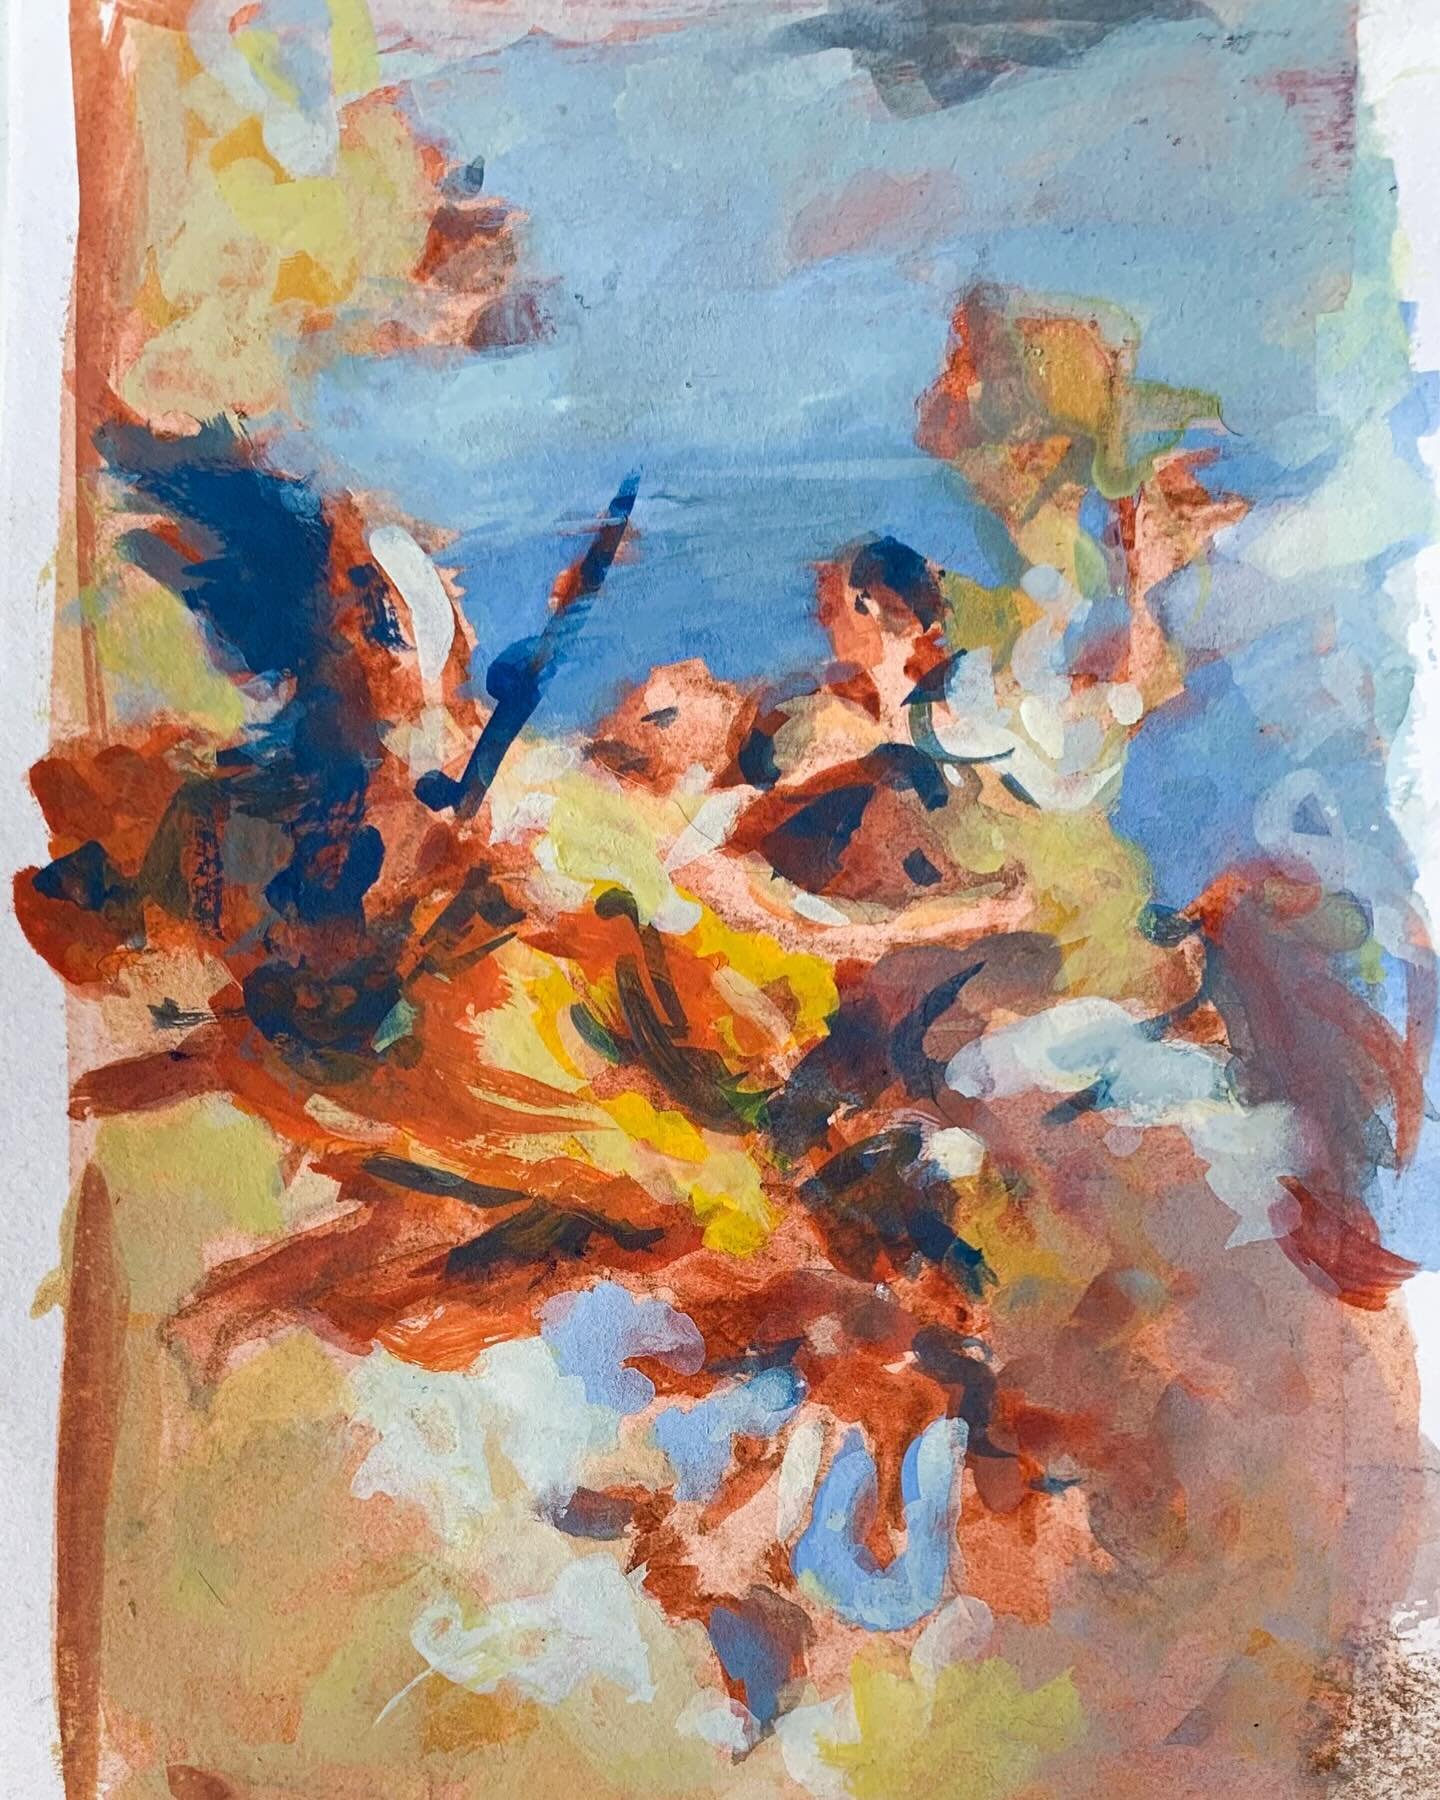 After Tiepolo &mdash; Allegory of Virtue and Nobility (Allegory of Strength &amp; Wisdom)

-
Looking back at some transcriptions of Tiepolo, in particular the values and hues to create structure and movement.
⠀⠀⠀⠀⠀⠀⠀⠀⠀
Gouache on Paper
7 x 15 cm
.
. 